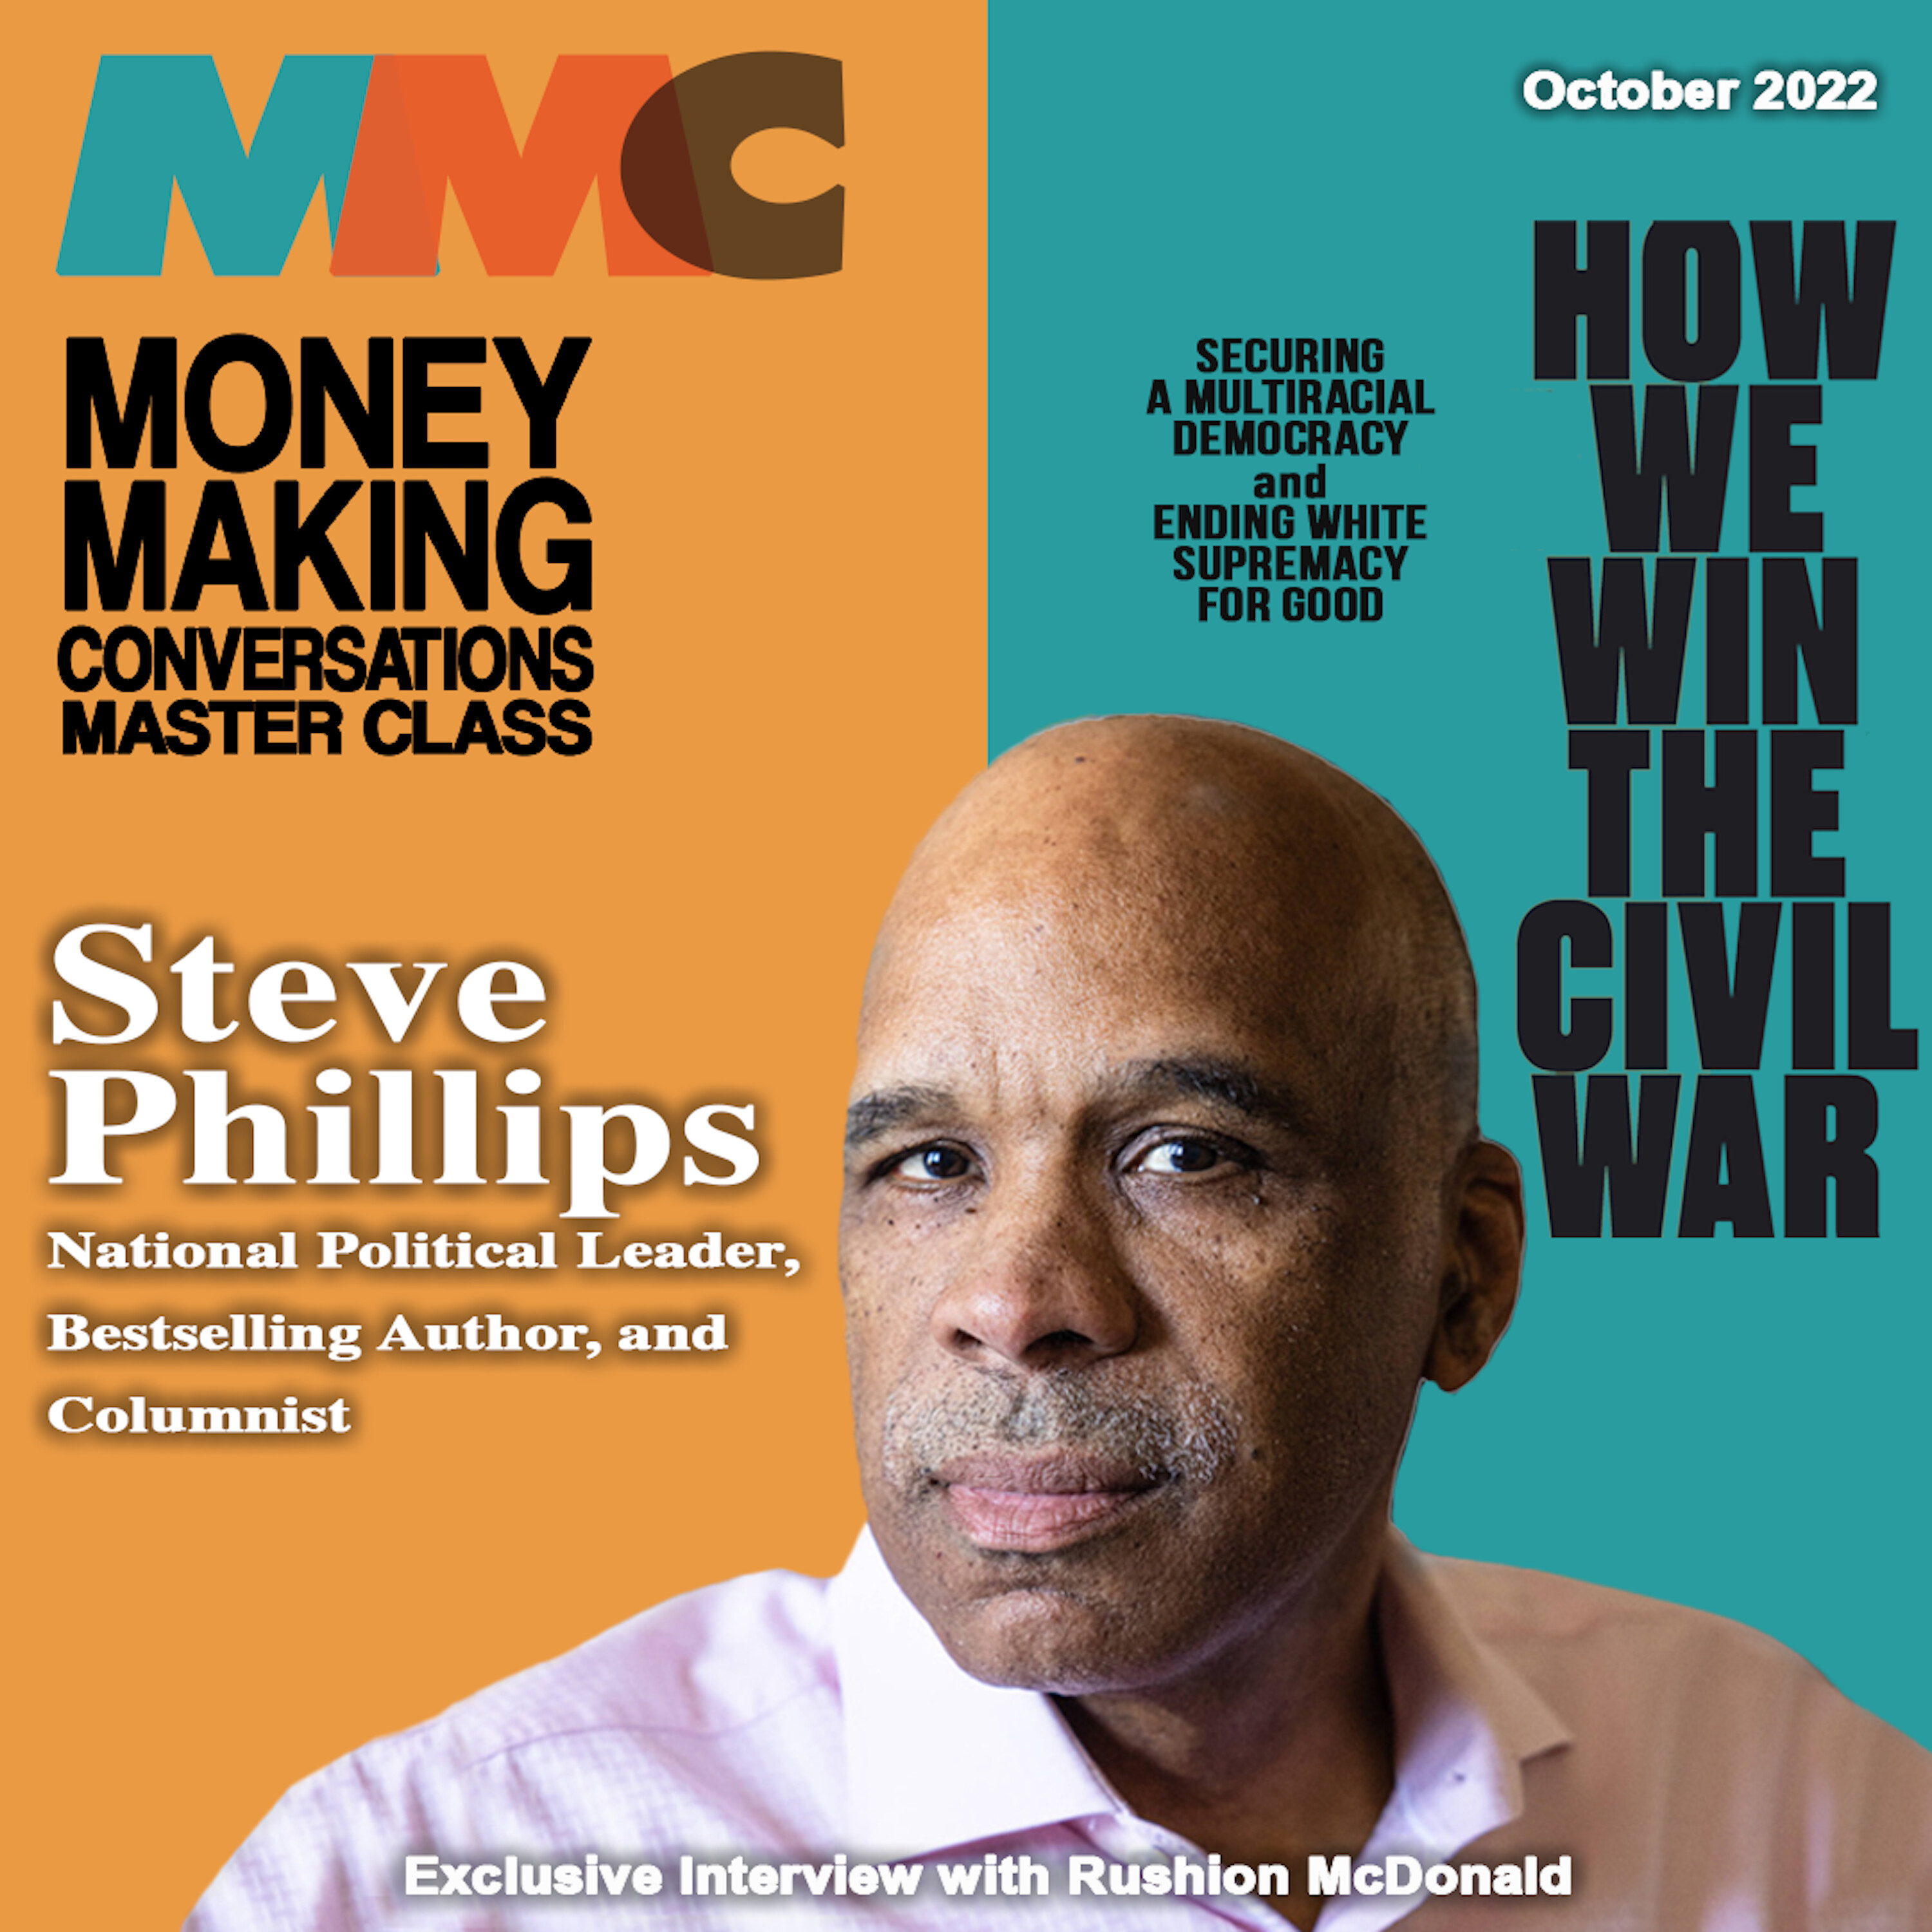 NY Times Bestselling author, Steve Phillips explains how we can win the Civil War.